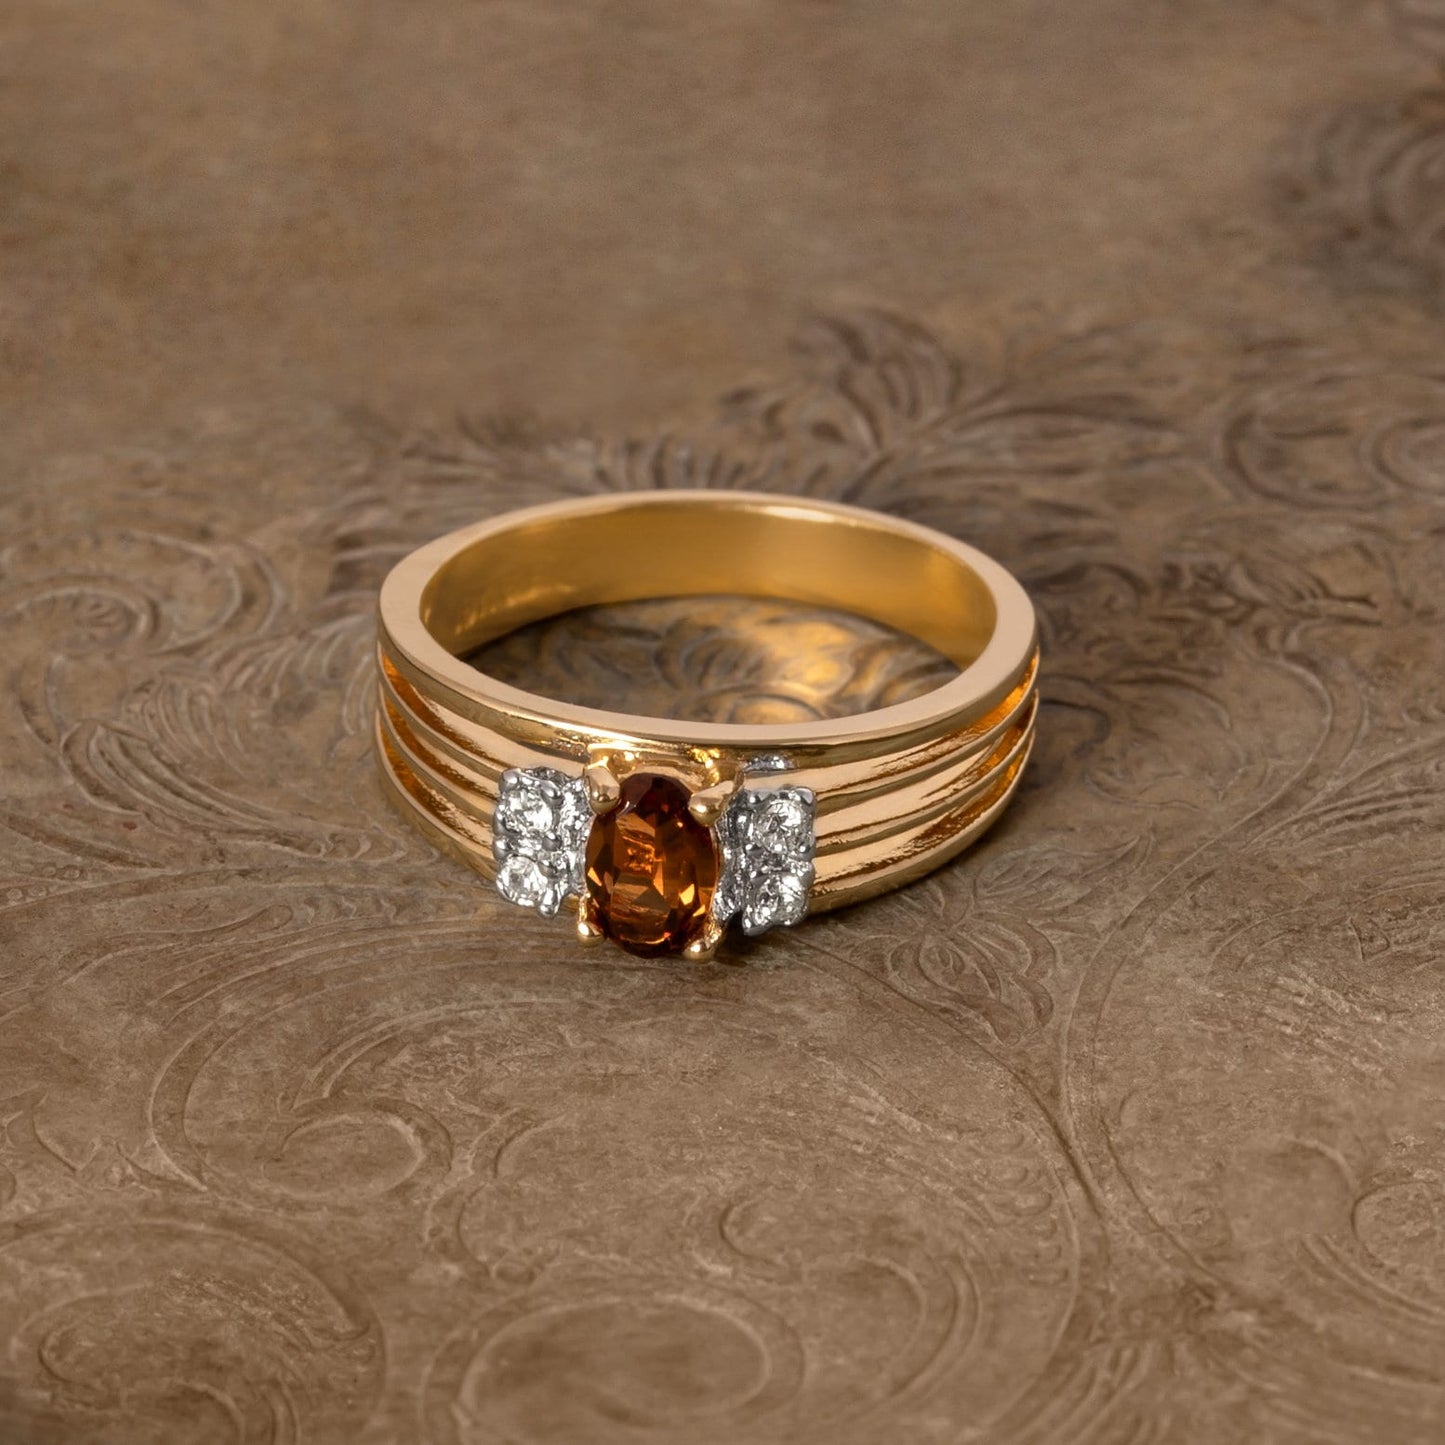 Vintage Ring Smoke Topaz and Clear Swarovski Crystals 18k Gold Band #R1318 - Limited Stock - Never Worn